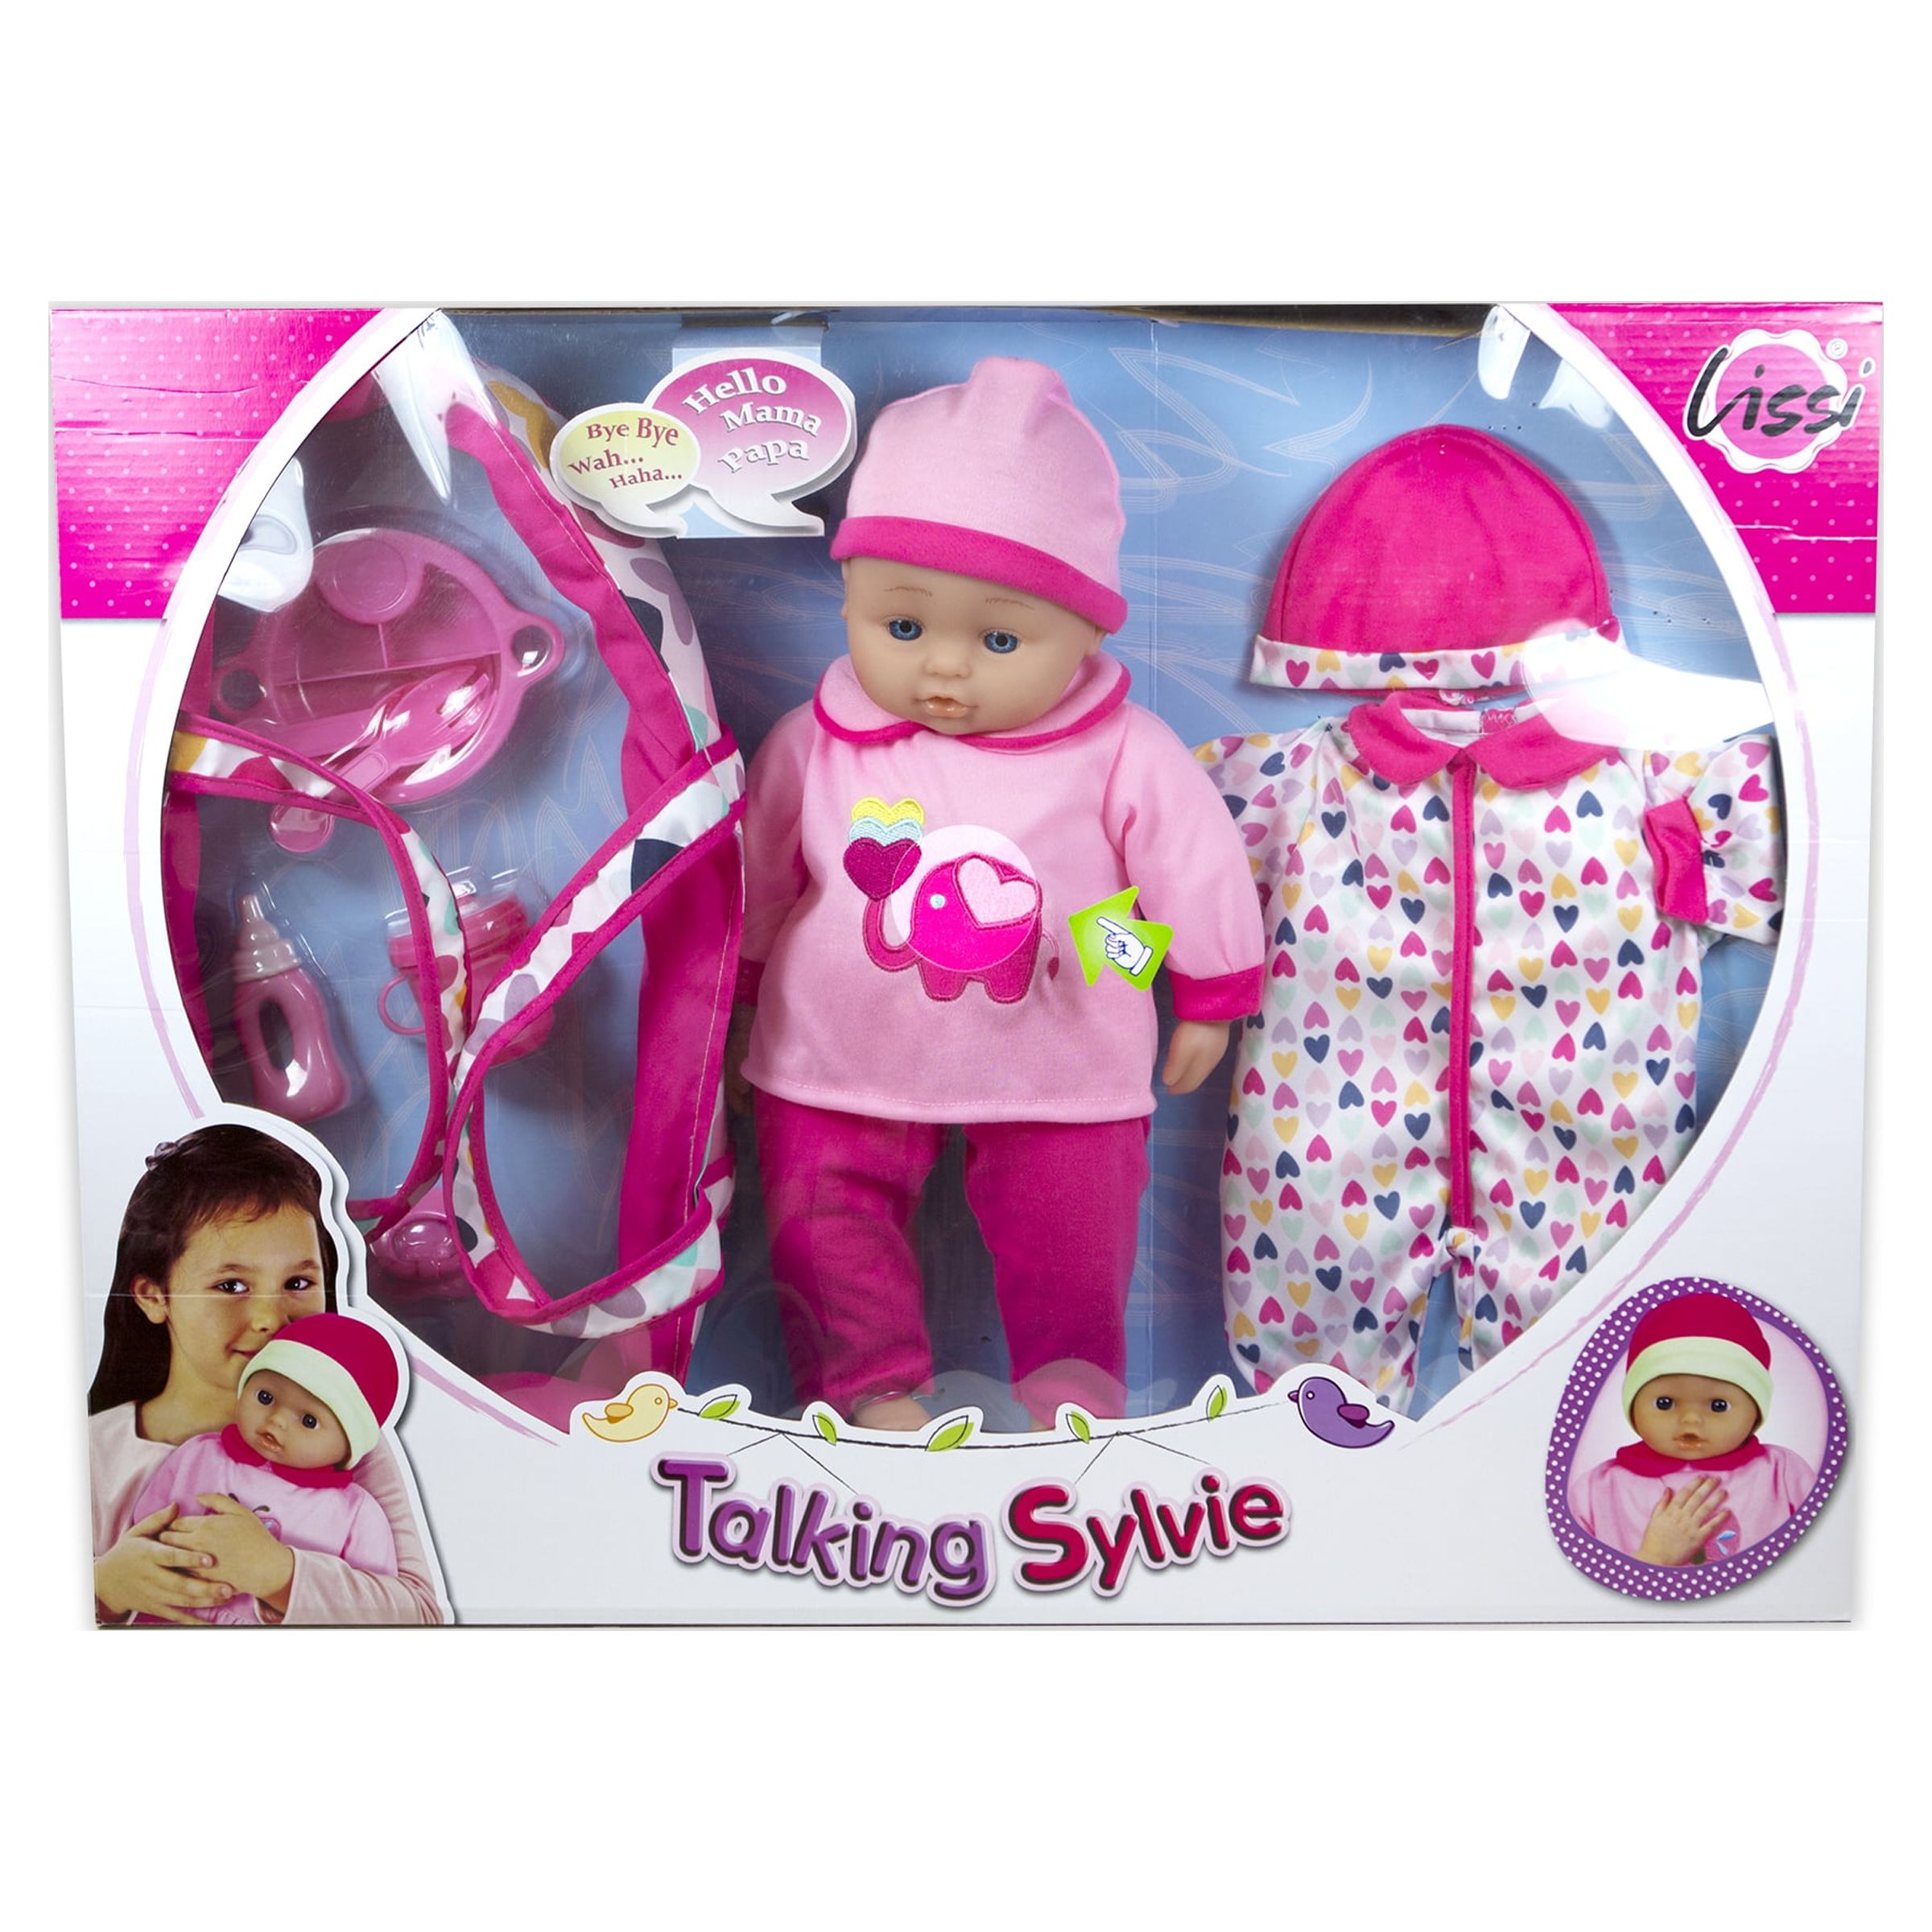 Lissi 16" Talking Baby Doll with Accessories - image 3 of 5